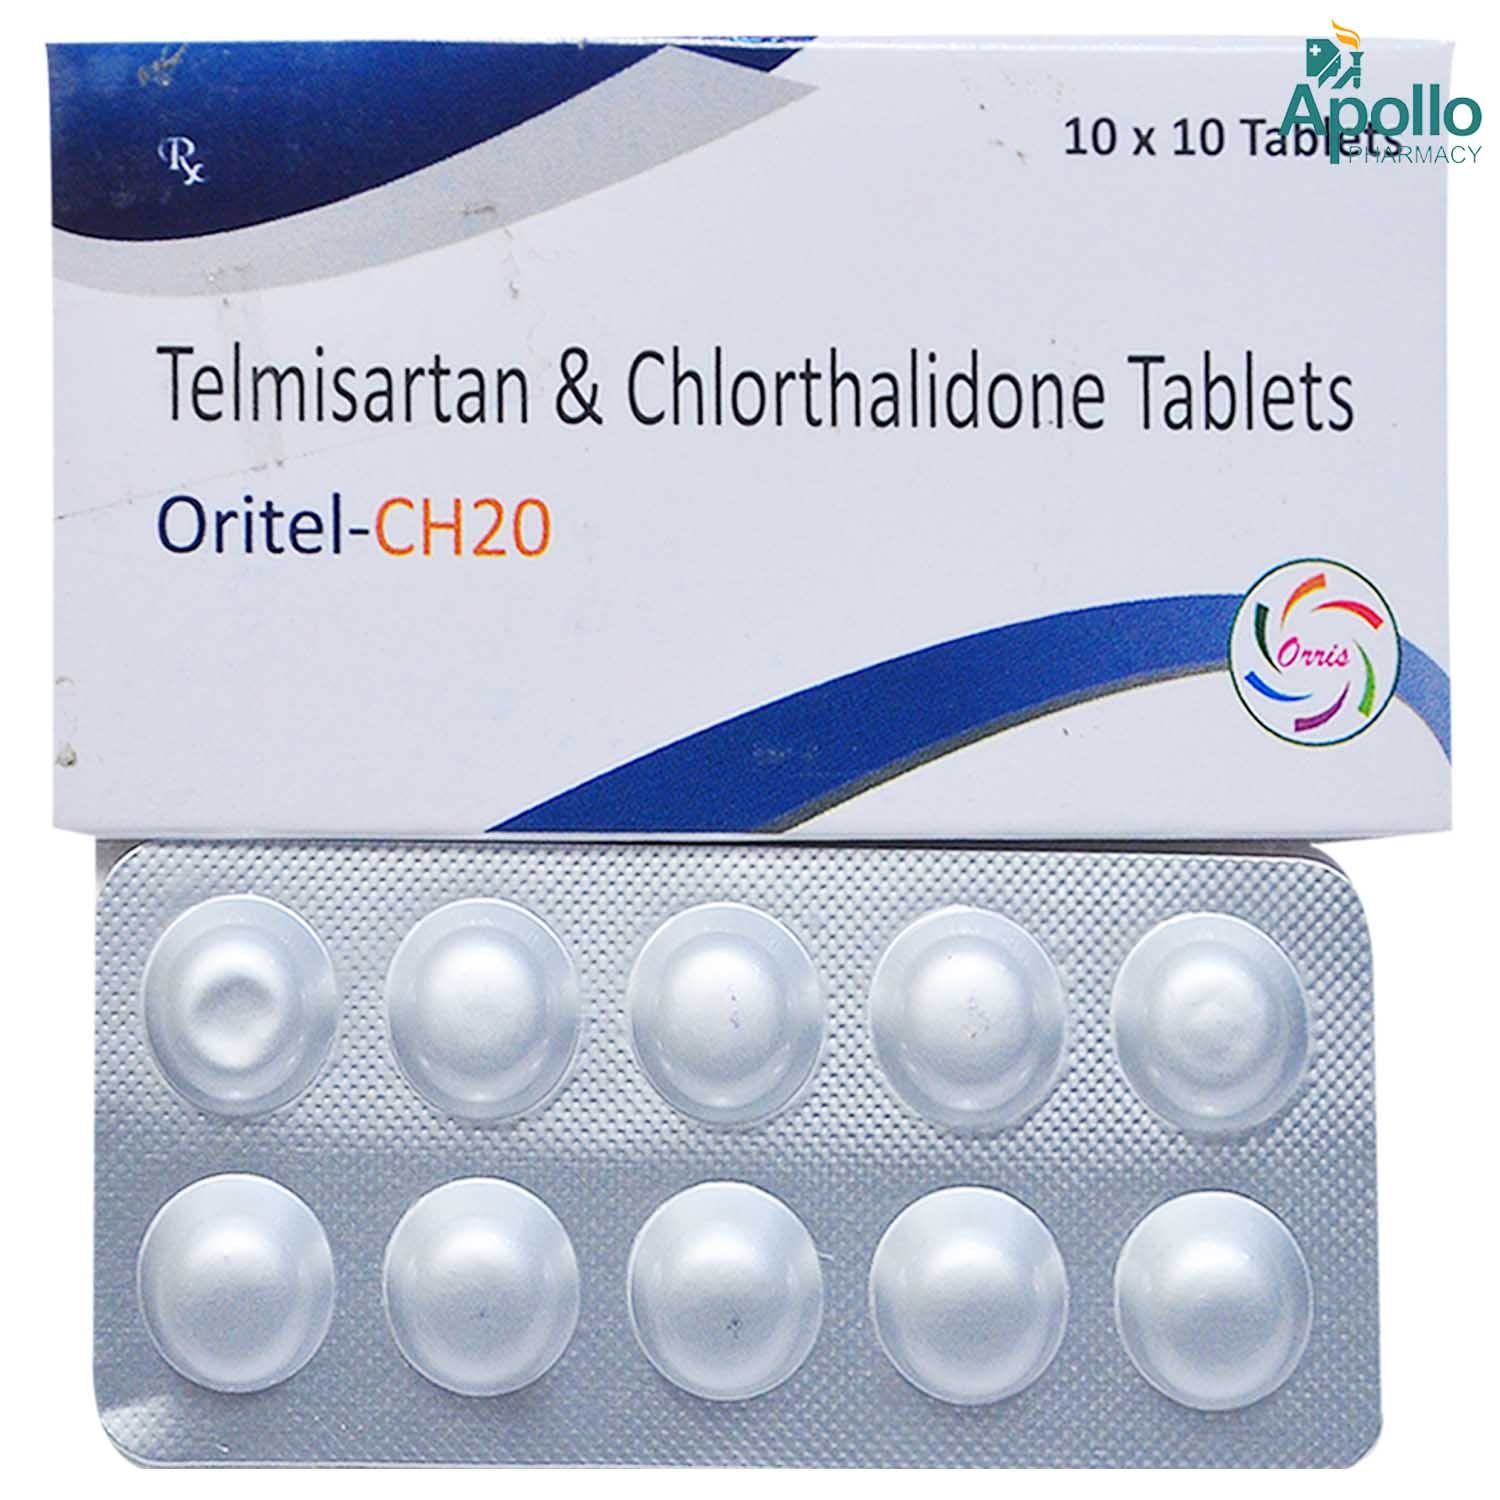 ORITEL CH20 TABLET 10'S, Pack of 10 TabletS